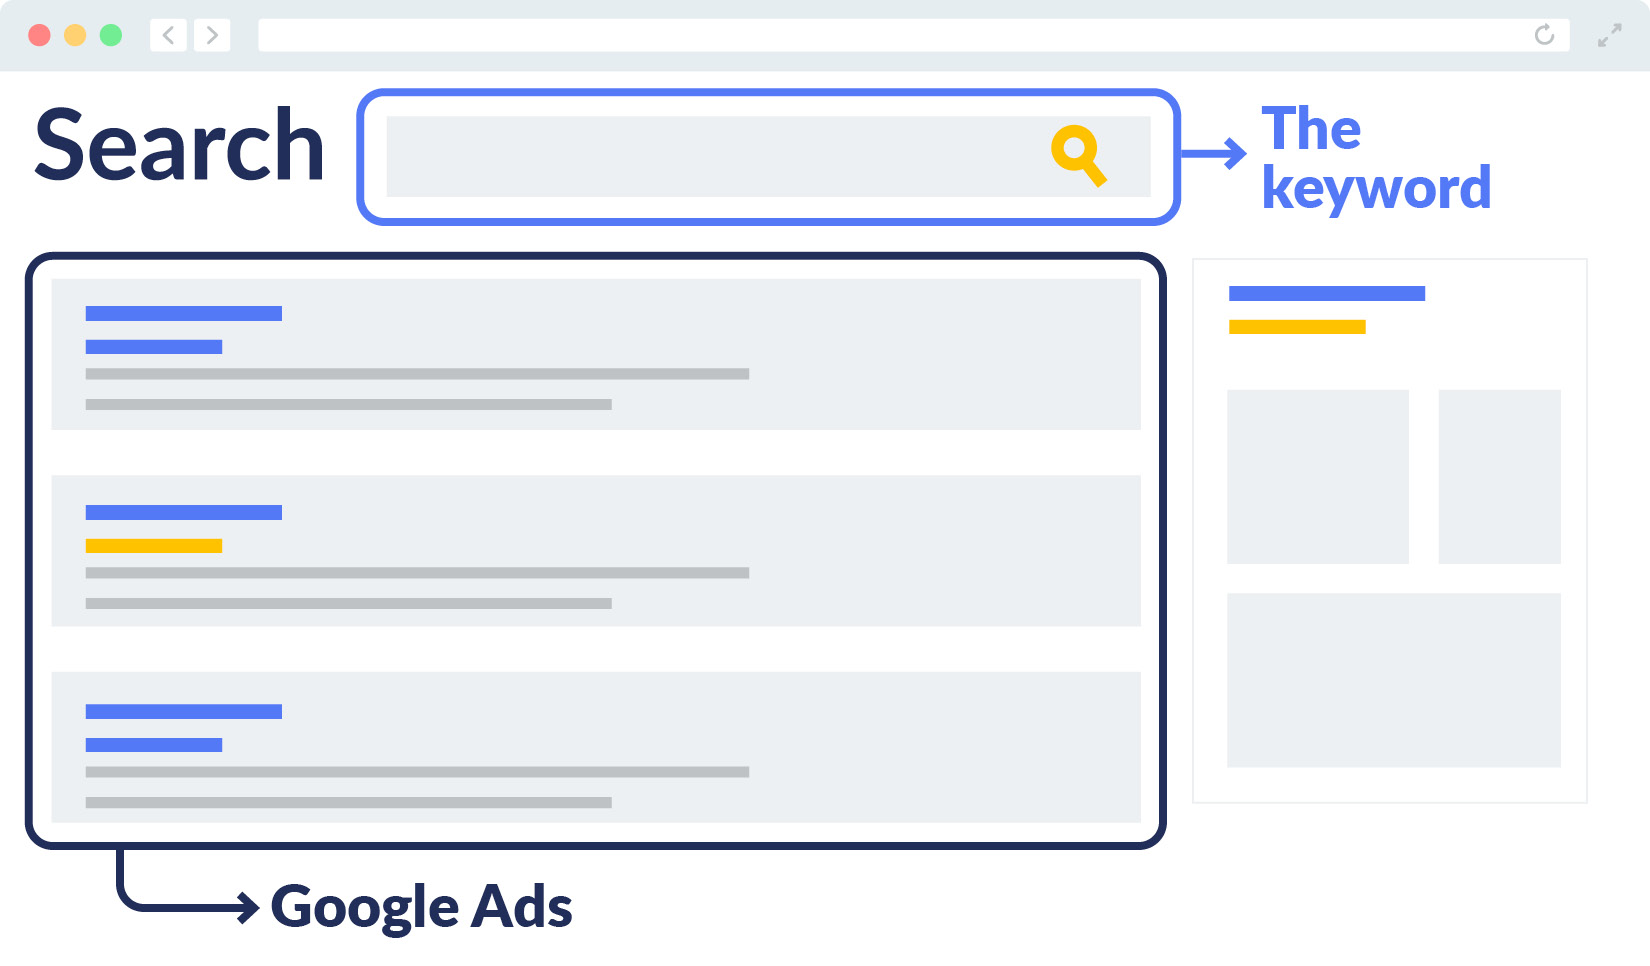 This graphic shows how Google Grants keywords result in Google Ads on a search engine.